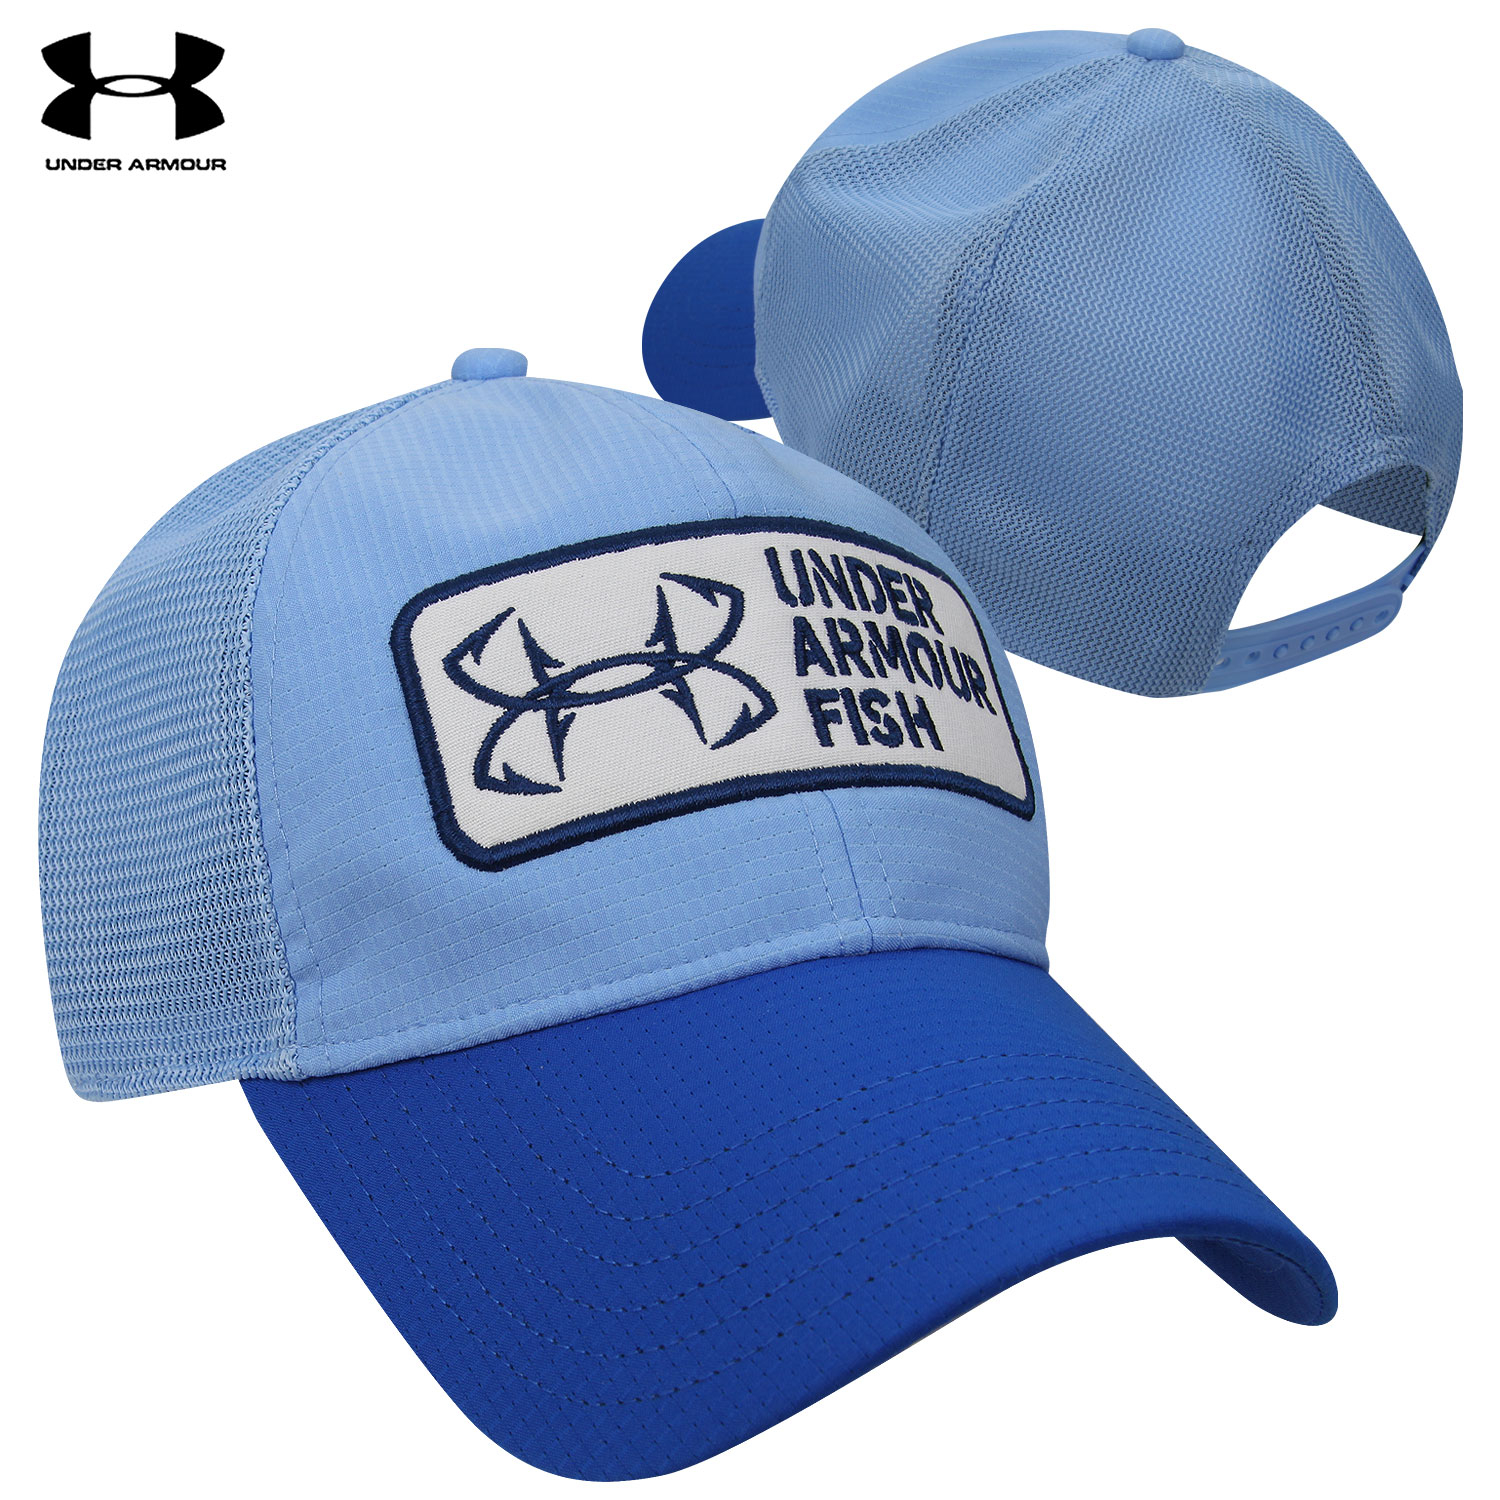 Under Armour CoolSwitch ArmourVent Patch Cap